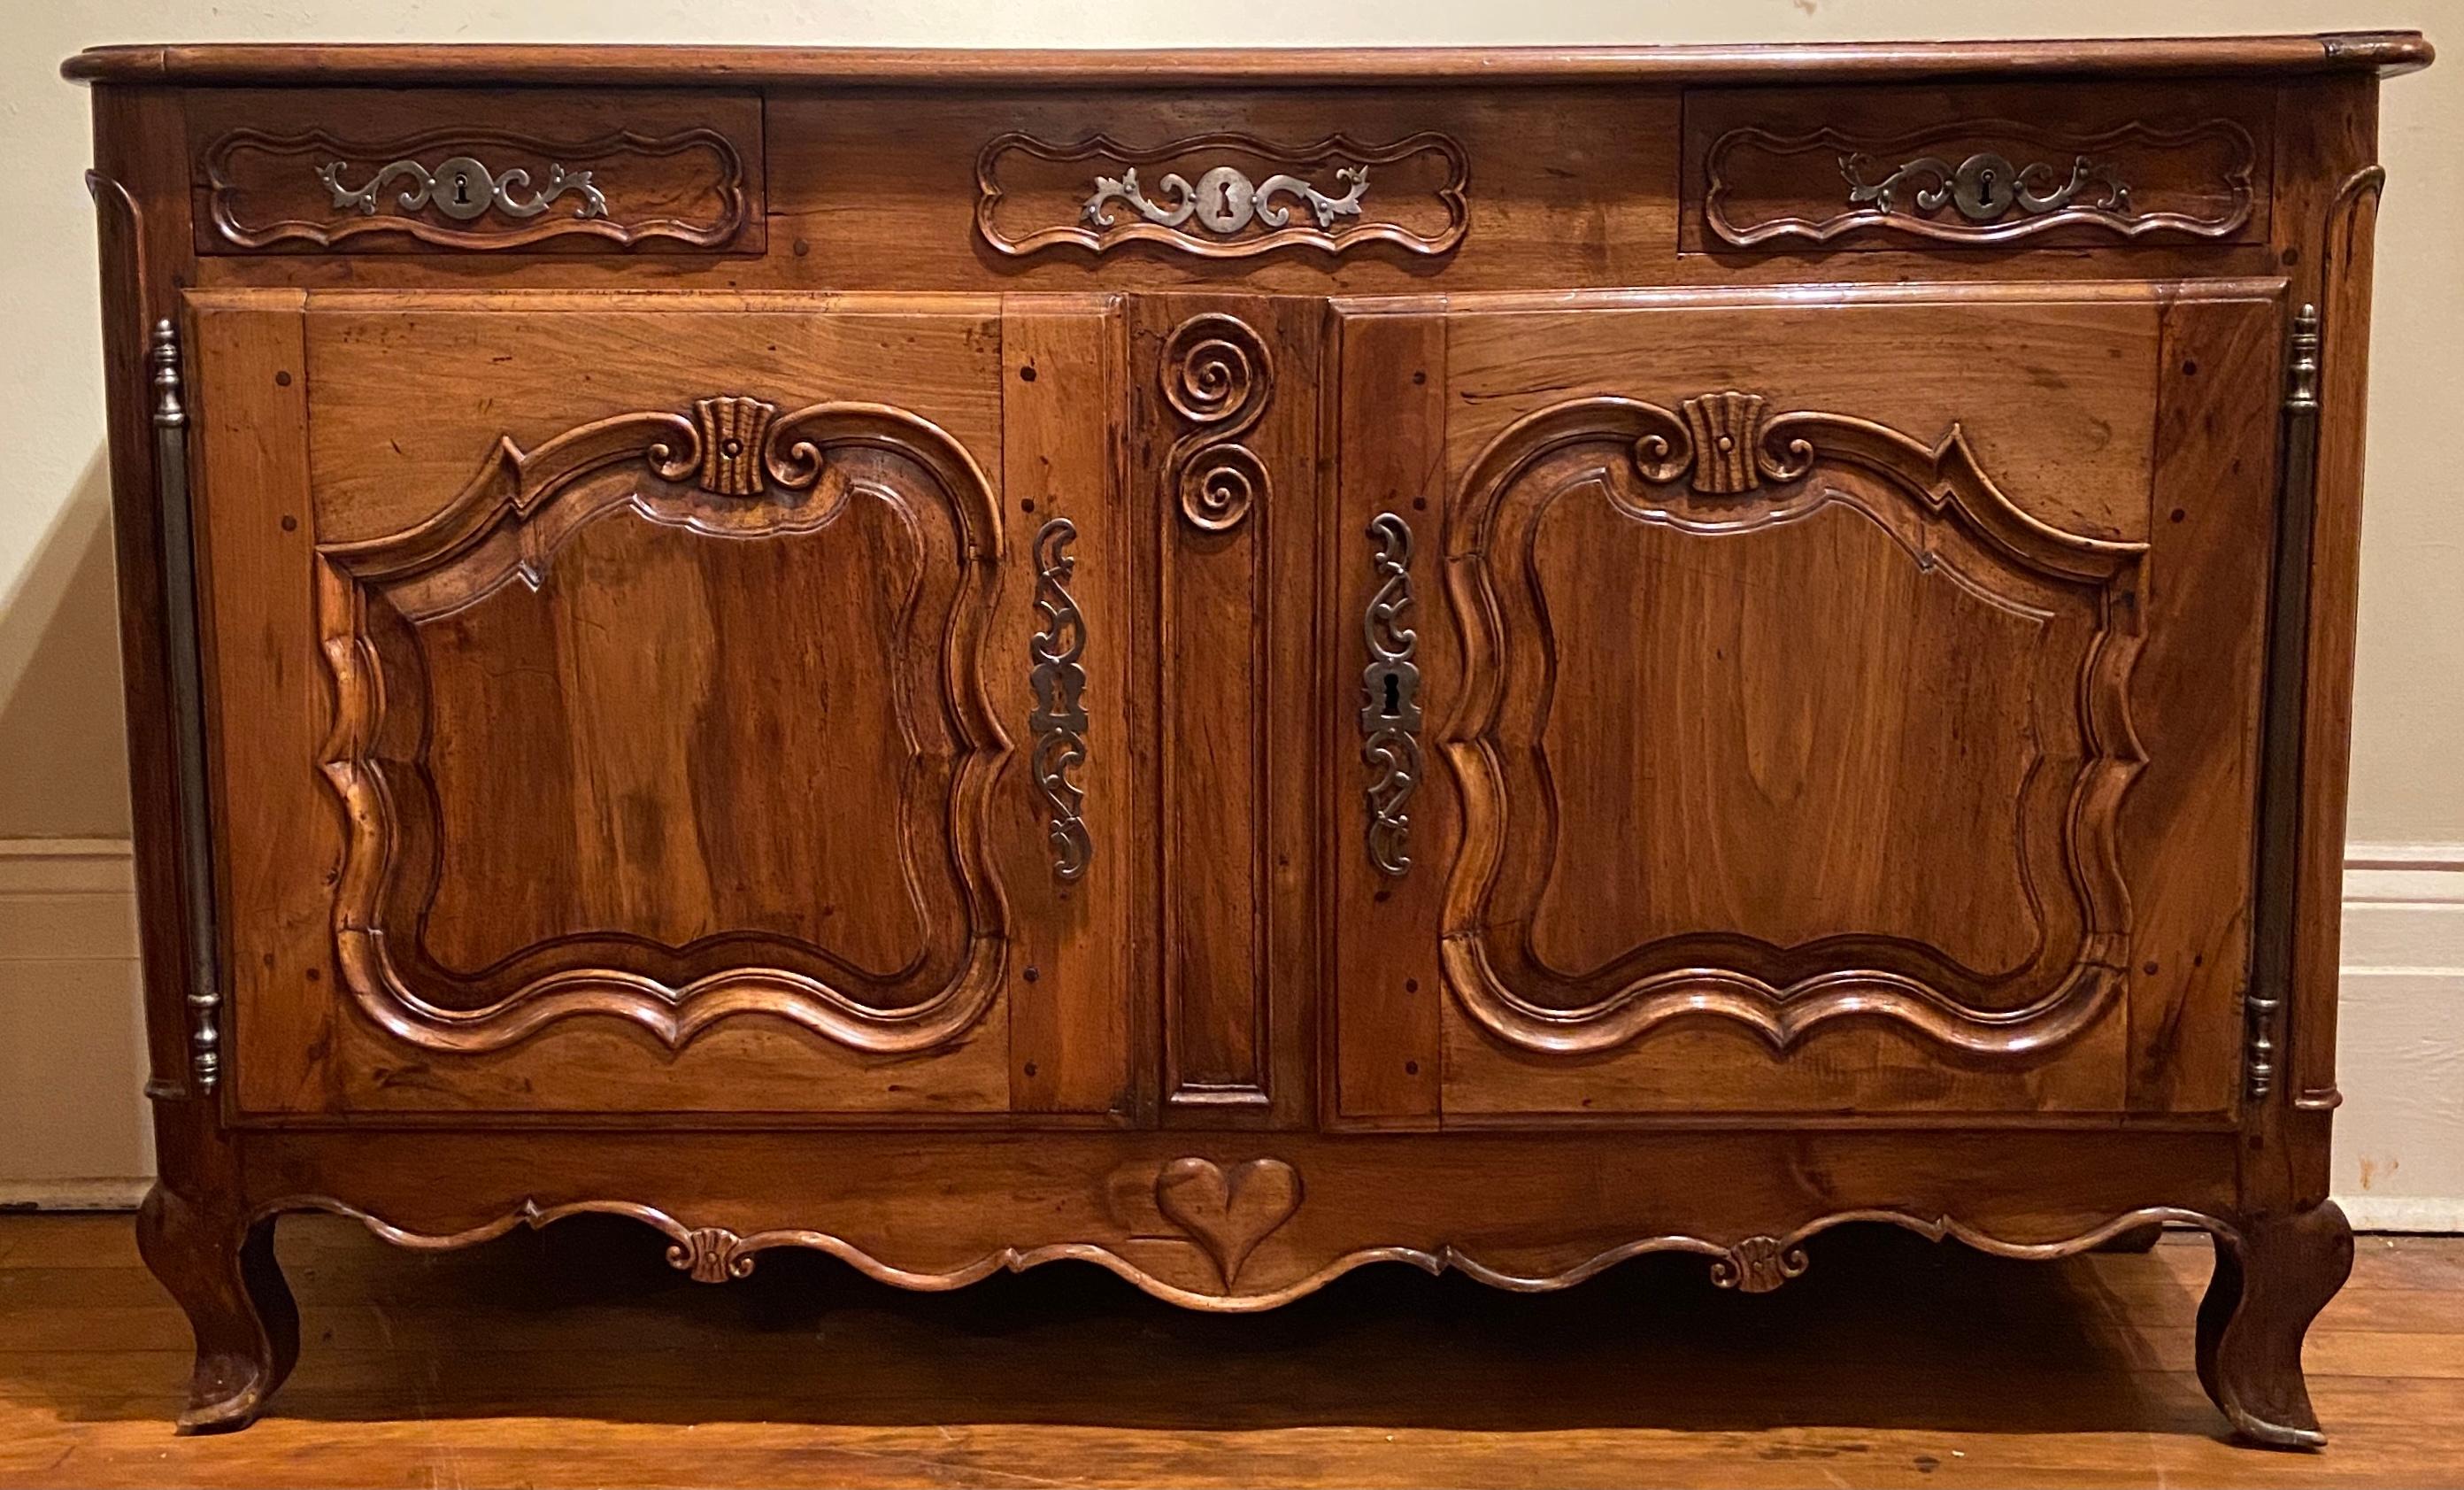 Antique 19th Century French Country Walnut Buffet, Circa 1840. This buffet is a good medium size, very sturdy and useful for multiple purposes.